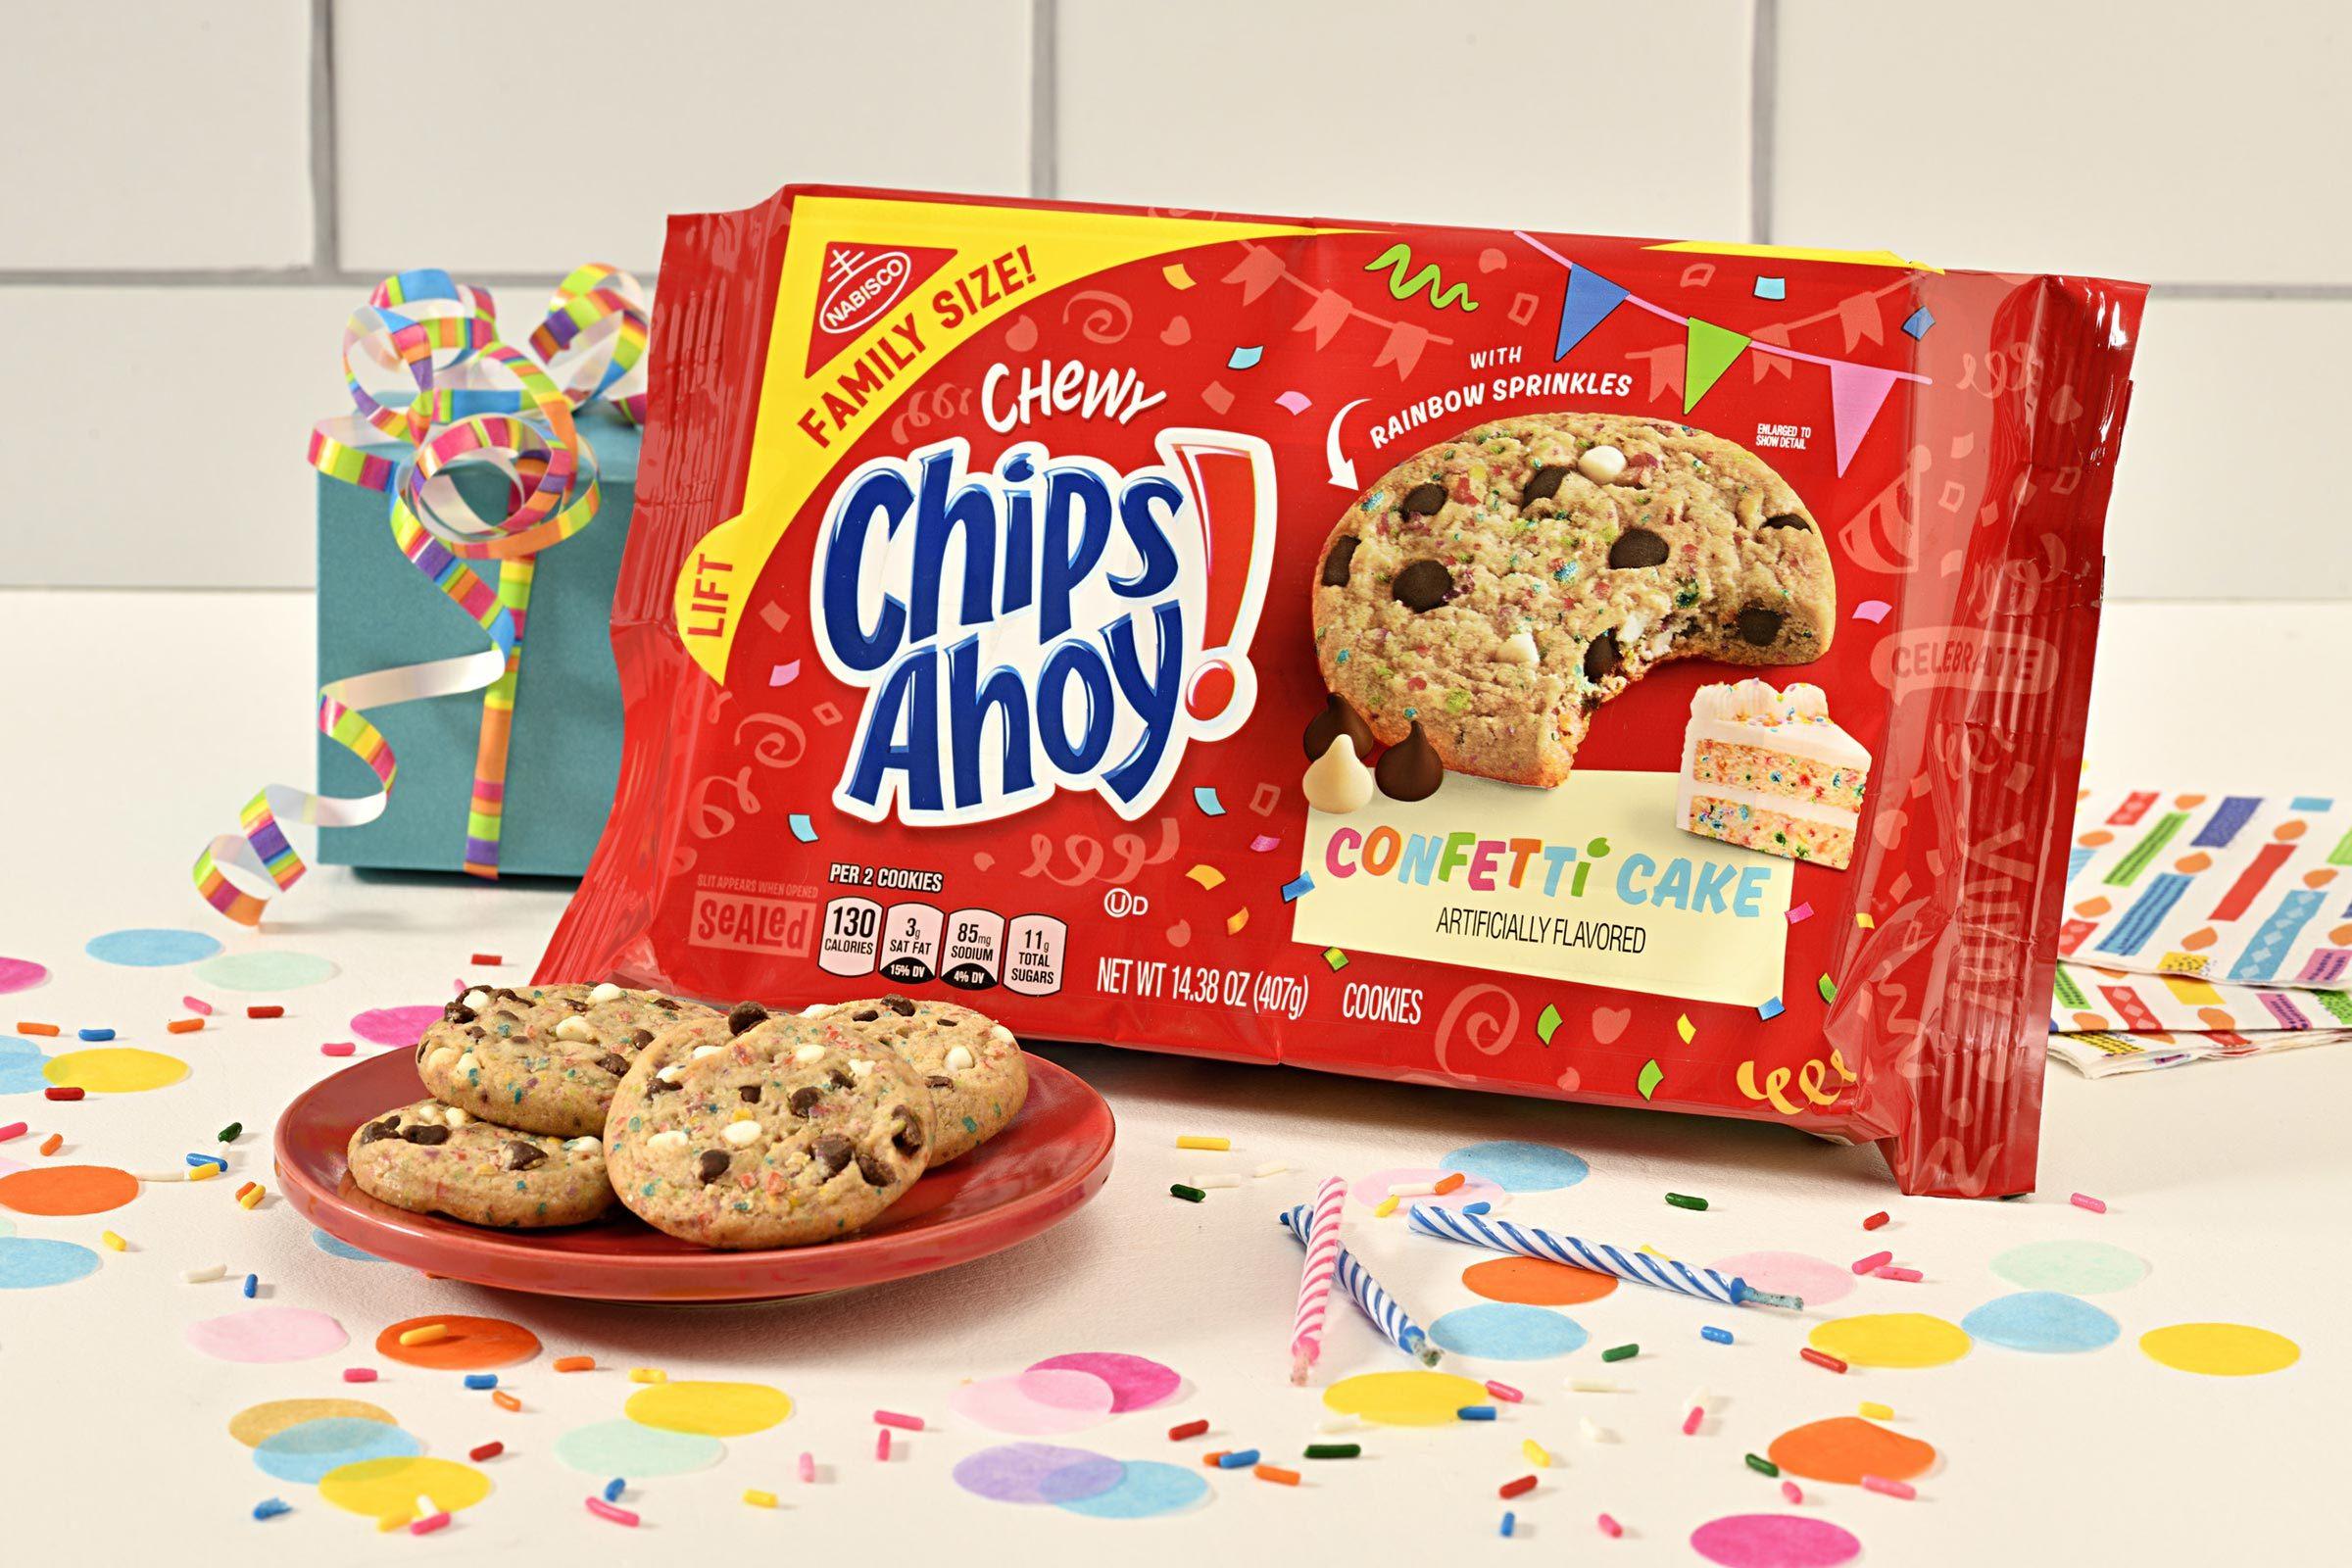 Chips Ahoy Confetti Cookies and Packaging on a birthday confetti themed background